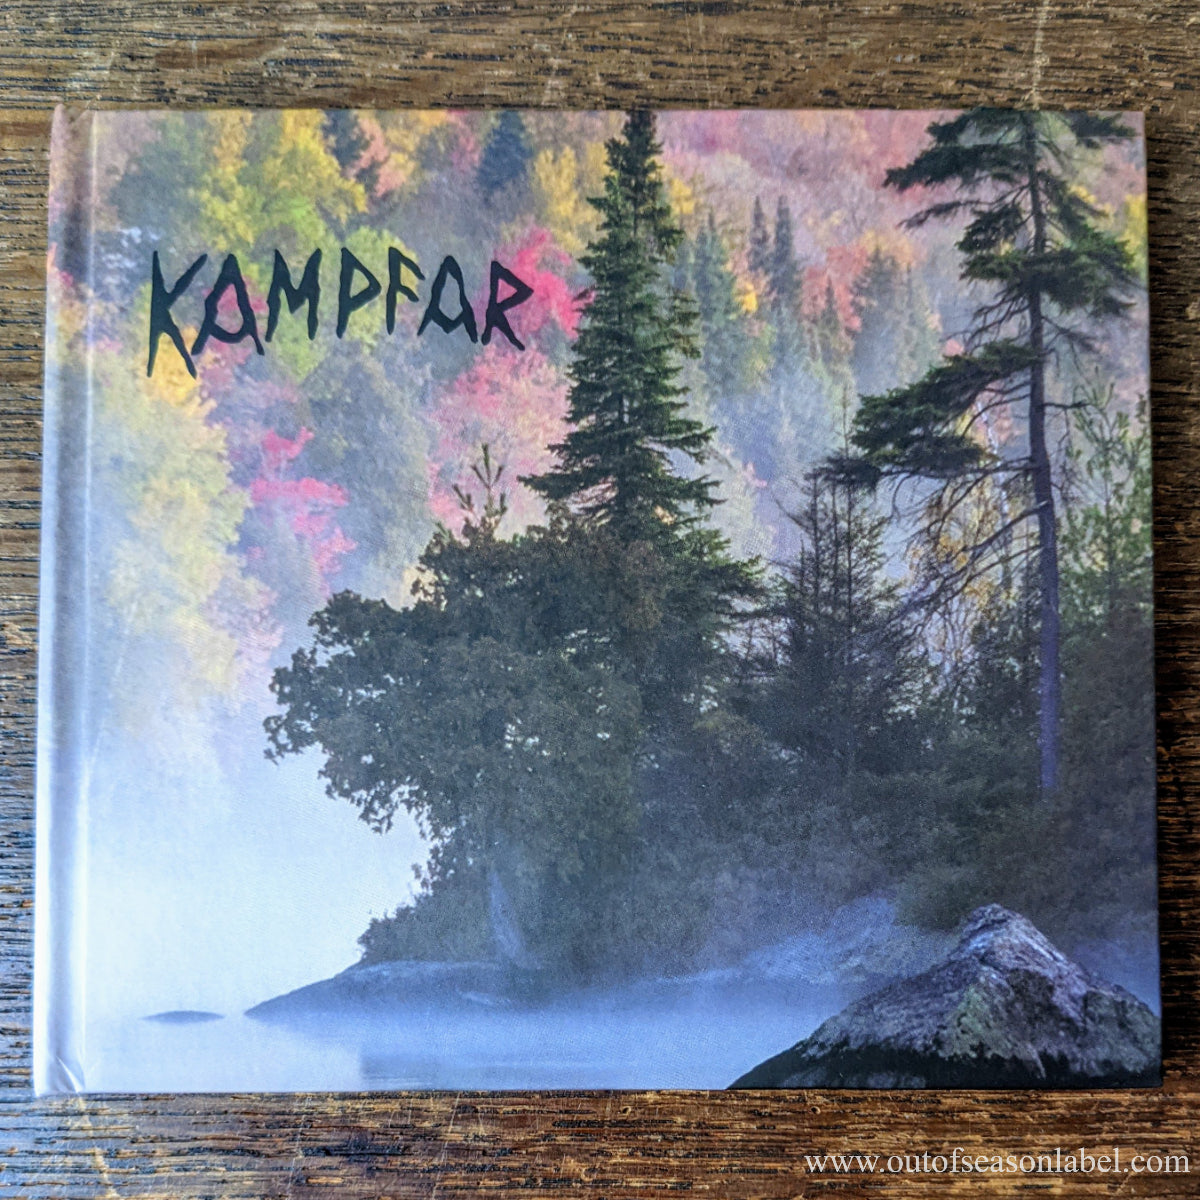 [SOLD OUT] KAMPFAR "s/t" CD [hardcover digibook, lim.500]